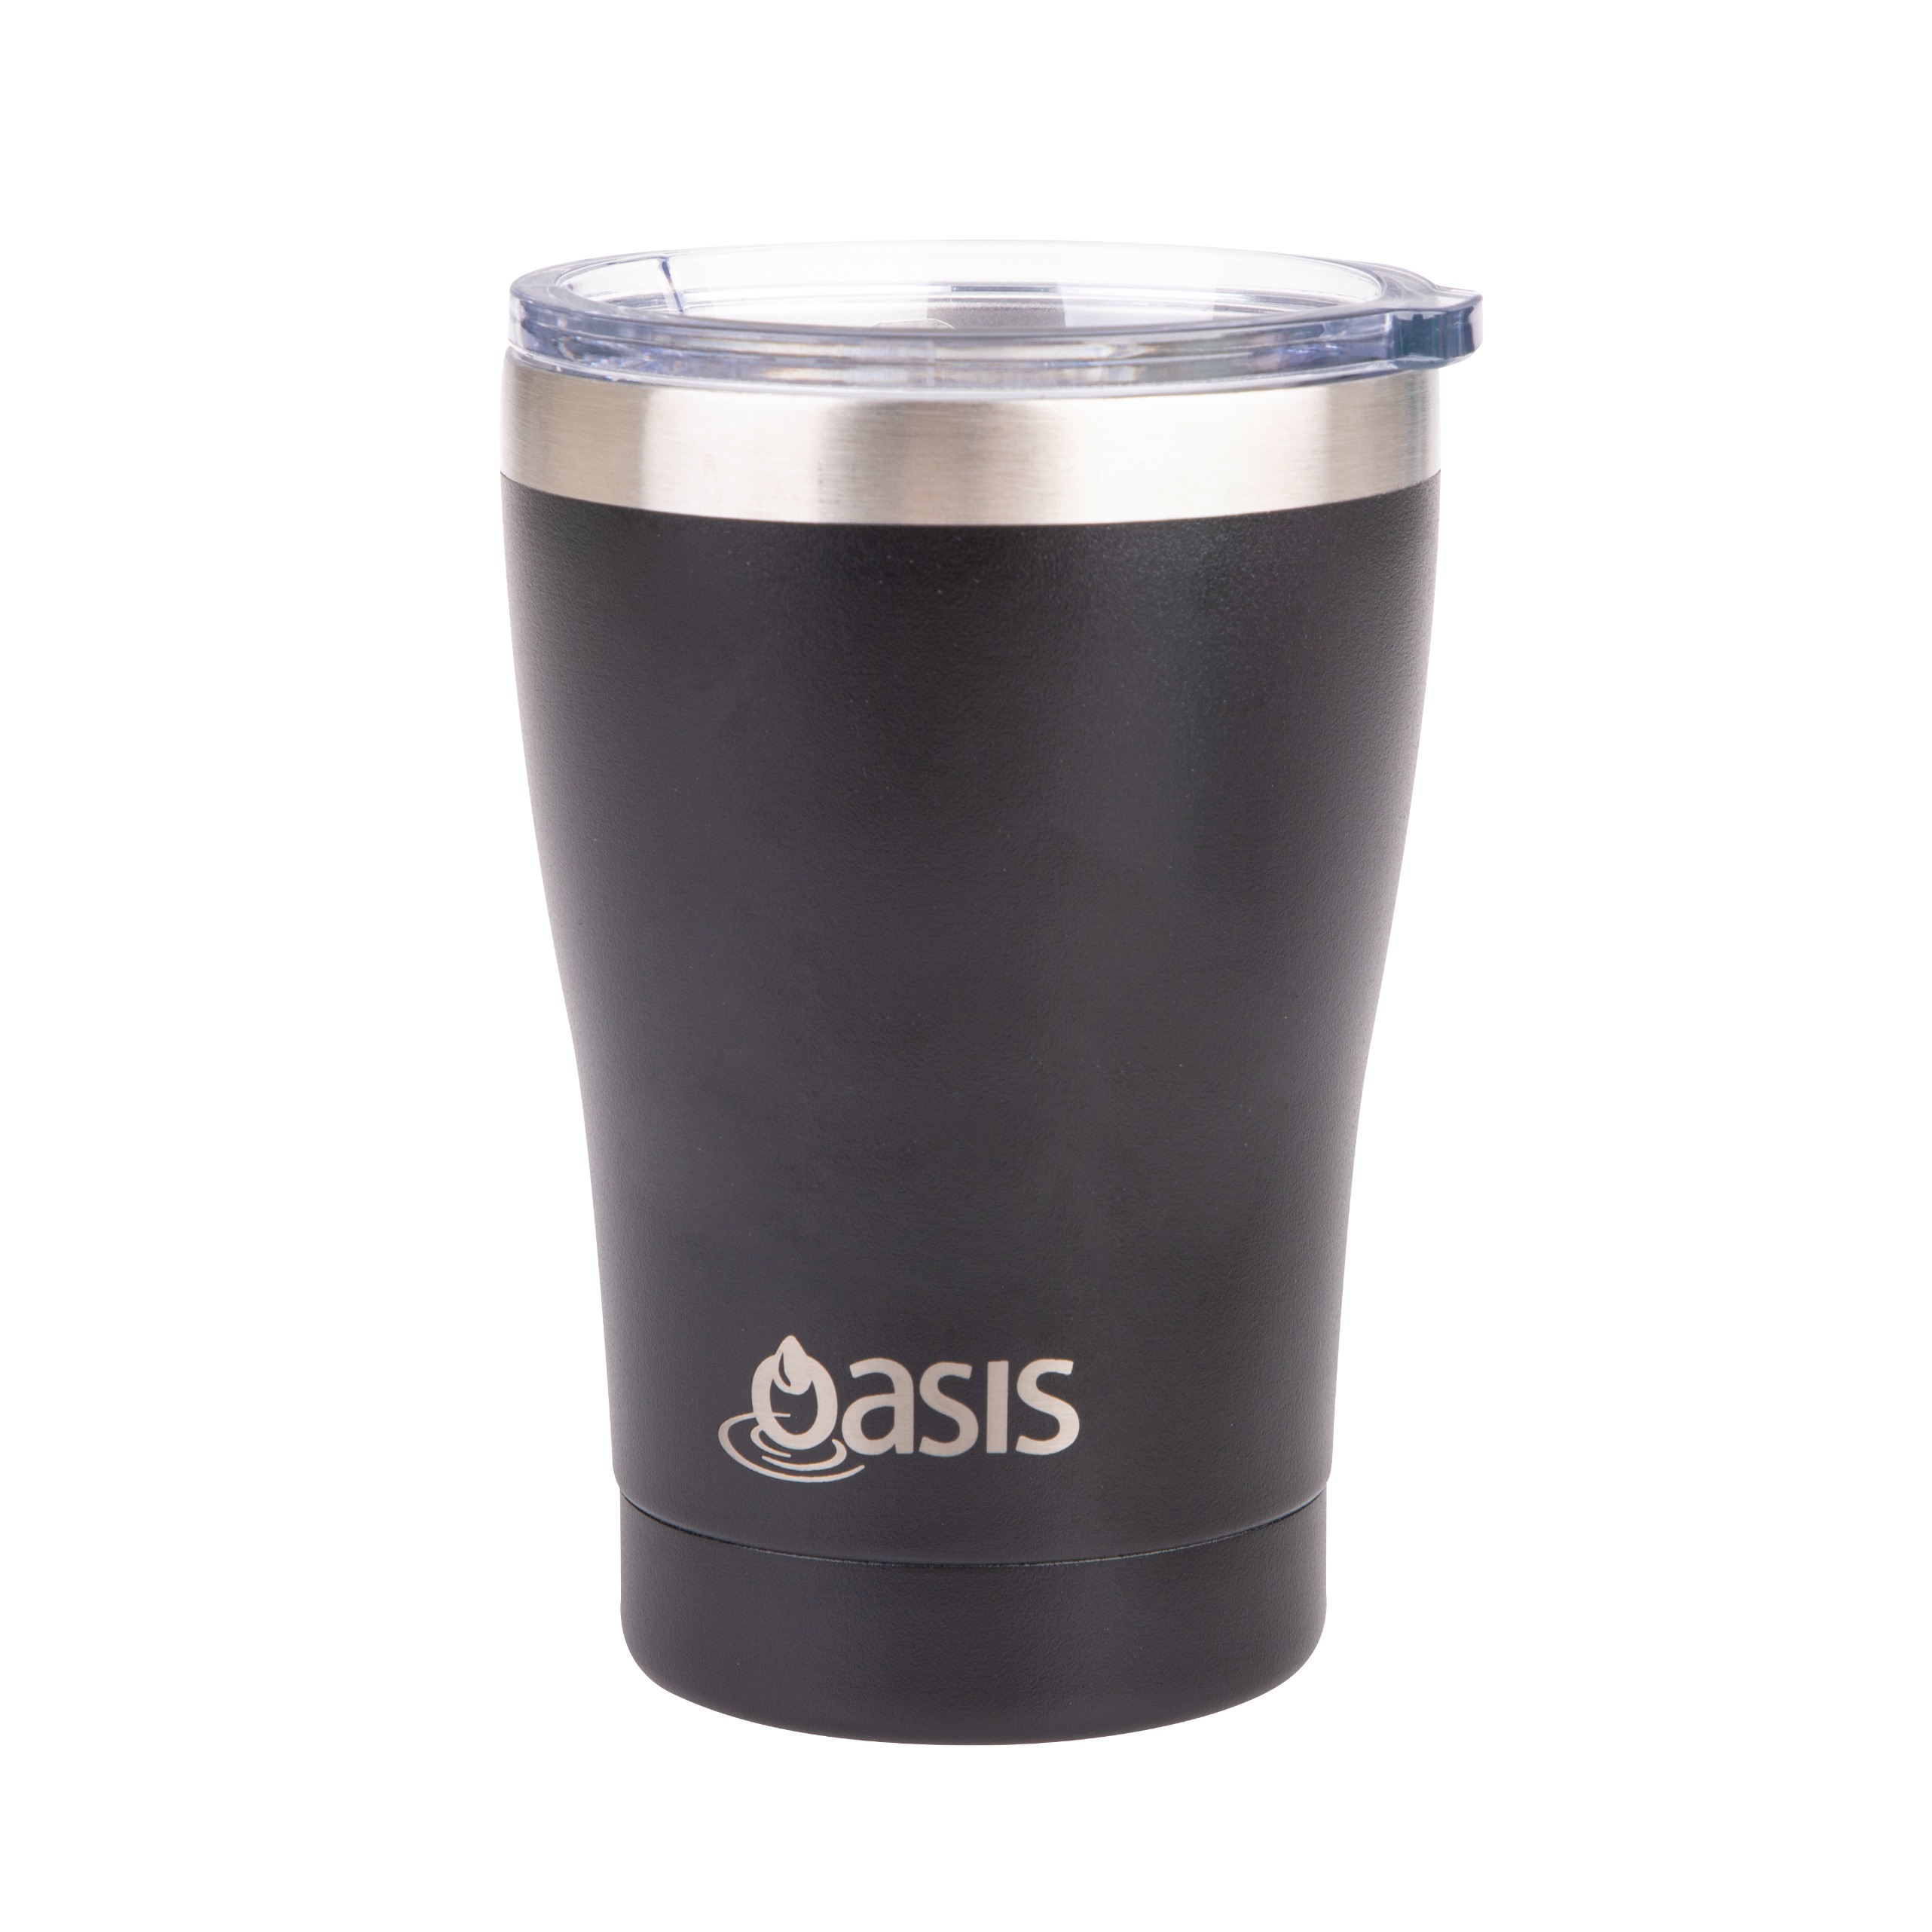 Oasis Stainless Steel Double Wall Insulated Travel Mug 350ml Black